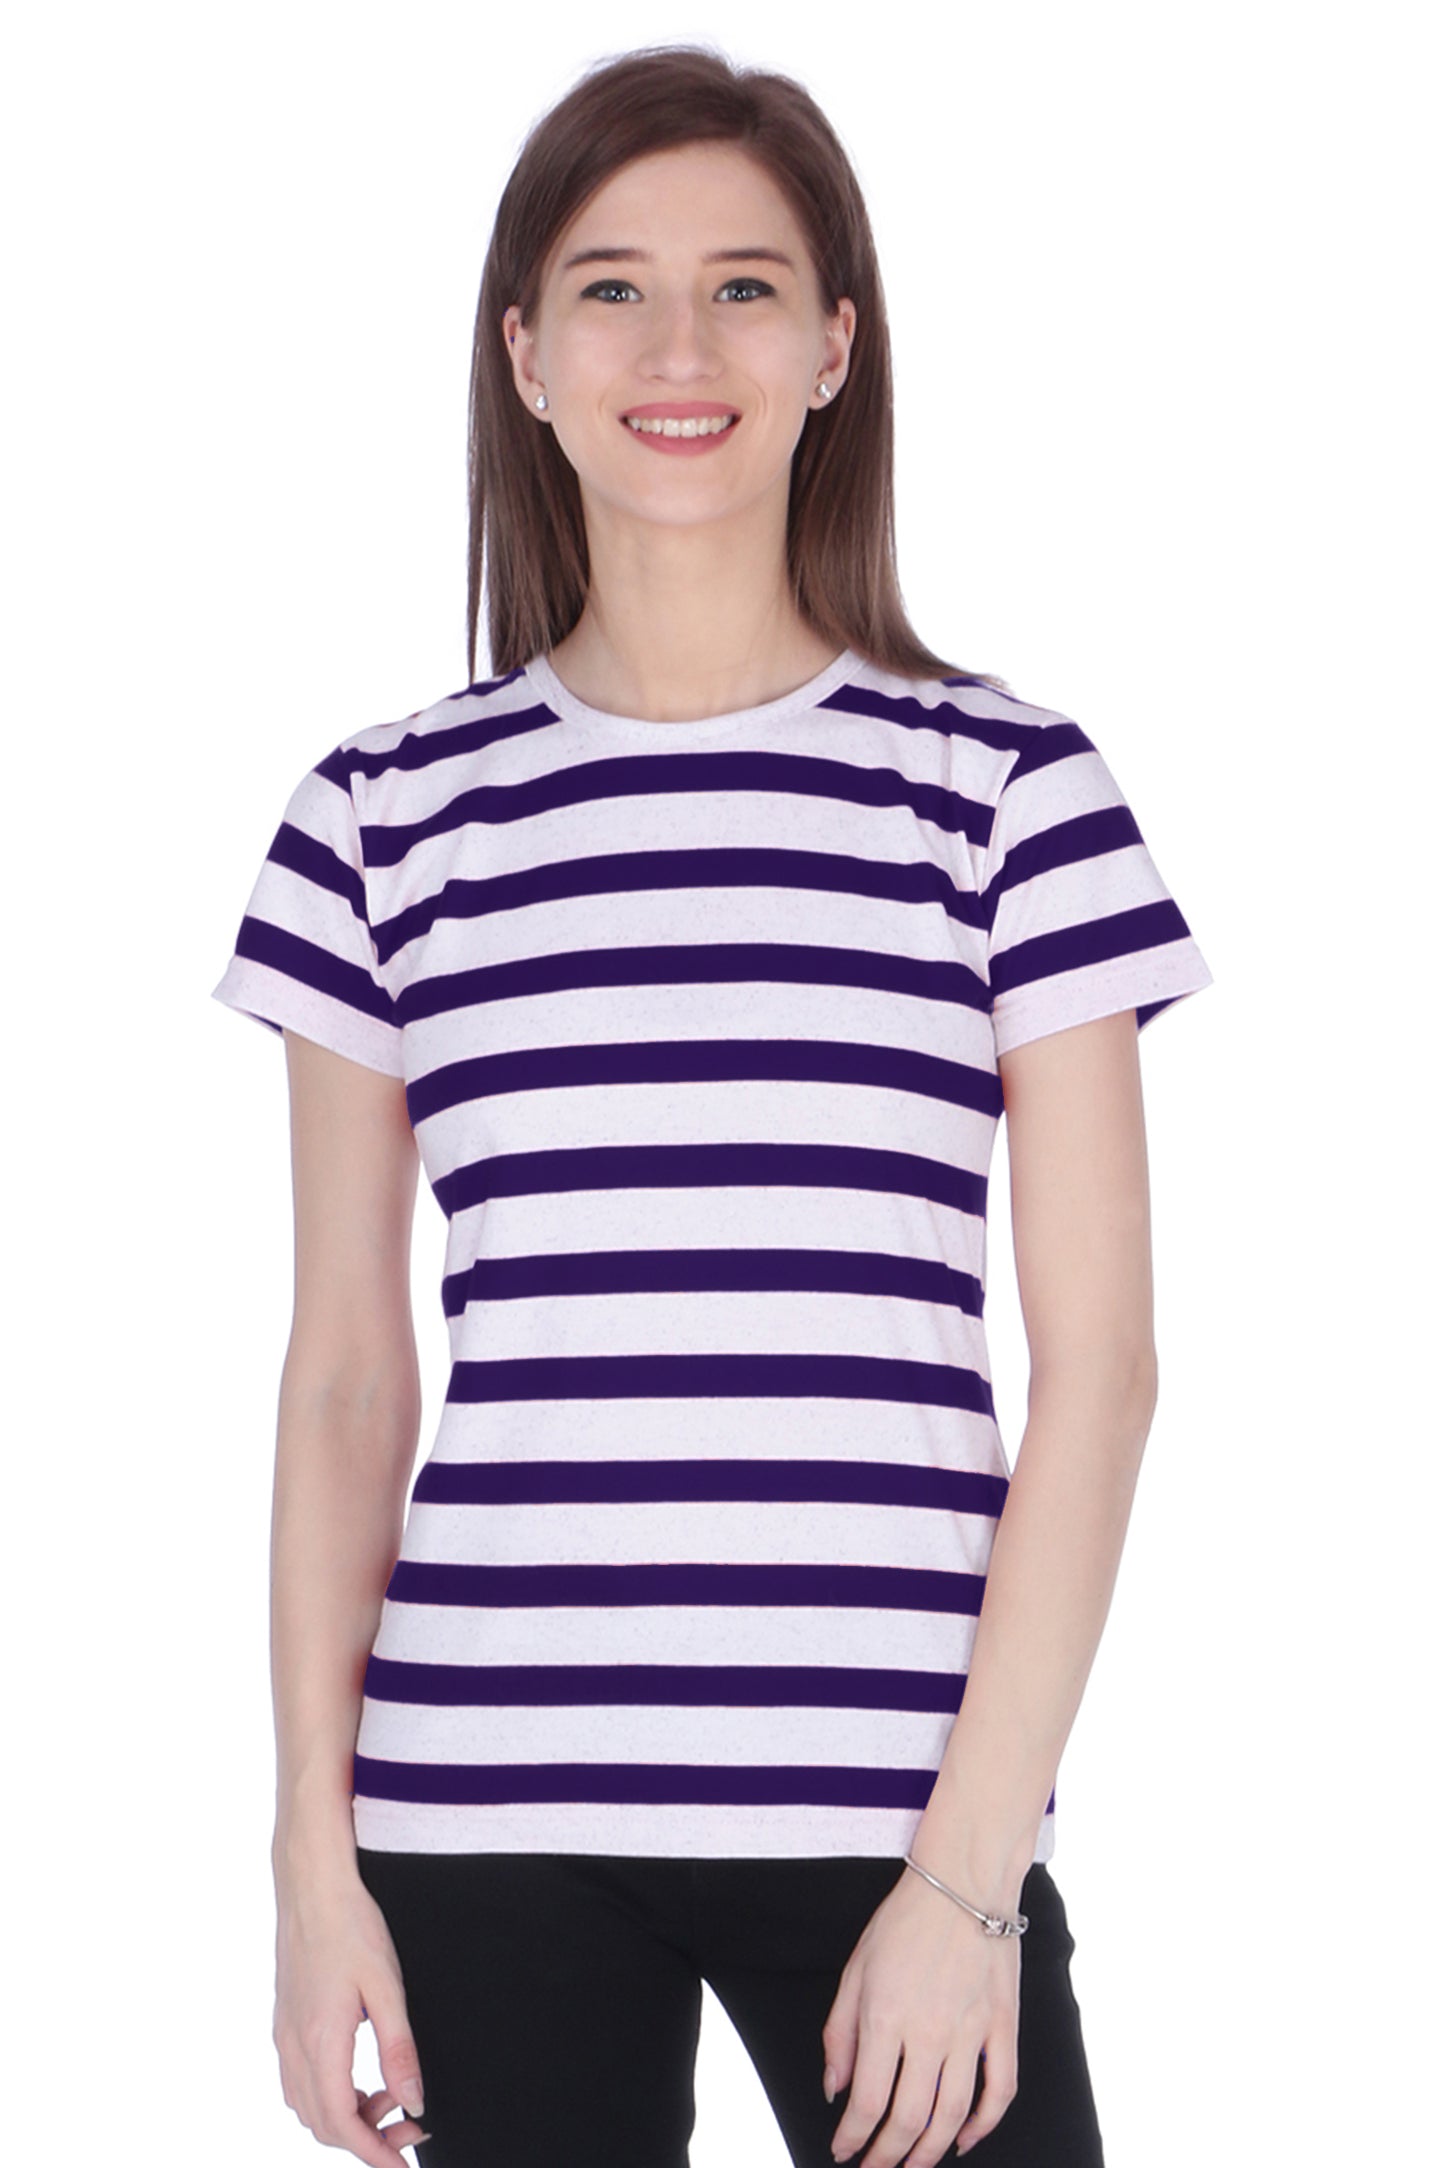 NEO GARMENTS Women's Multi-colored Half Sleeve Cotton Round Neck Stripe T-shirt  | SIZE FROM S-32" TO 3XL-42"